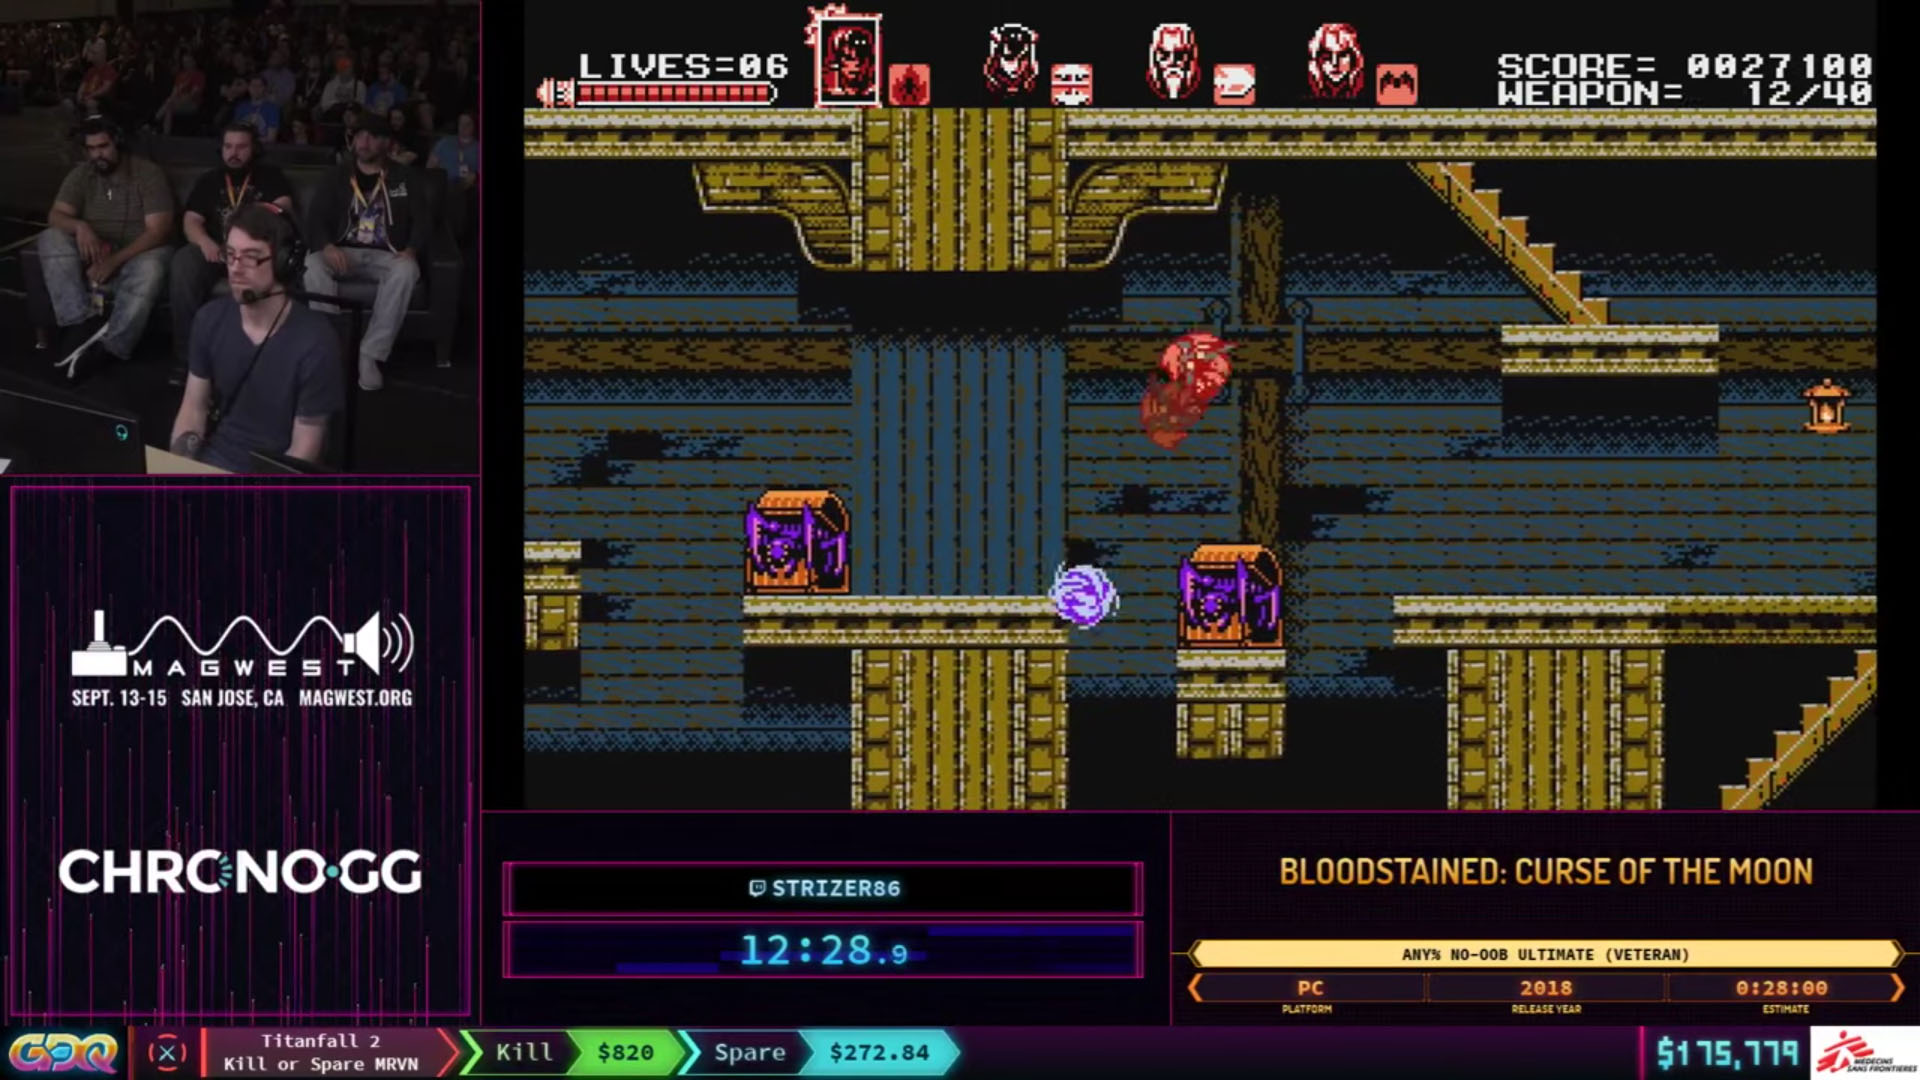 Bloodstained: Curse of the Moon Any% No OOB Ultimate Veteran